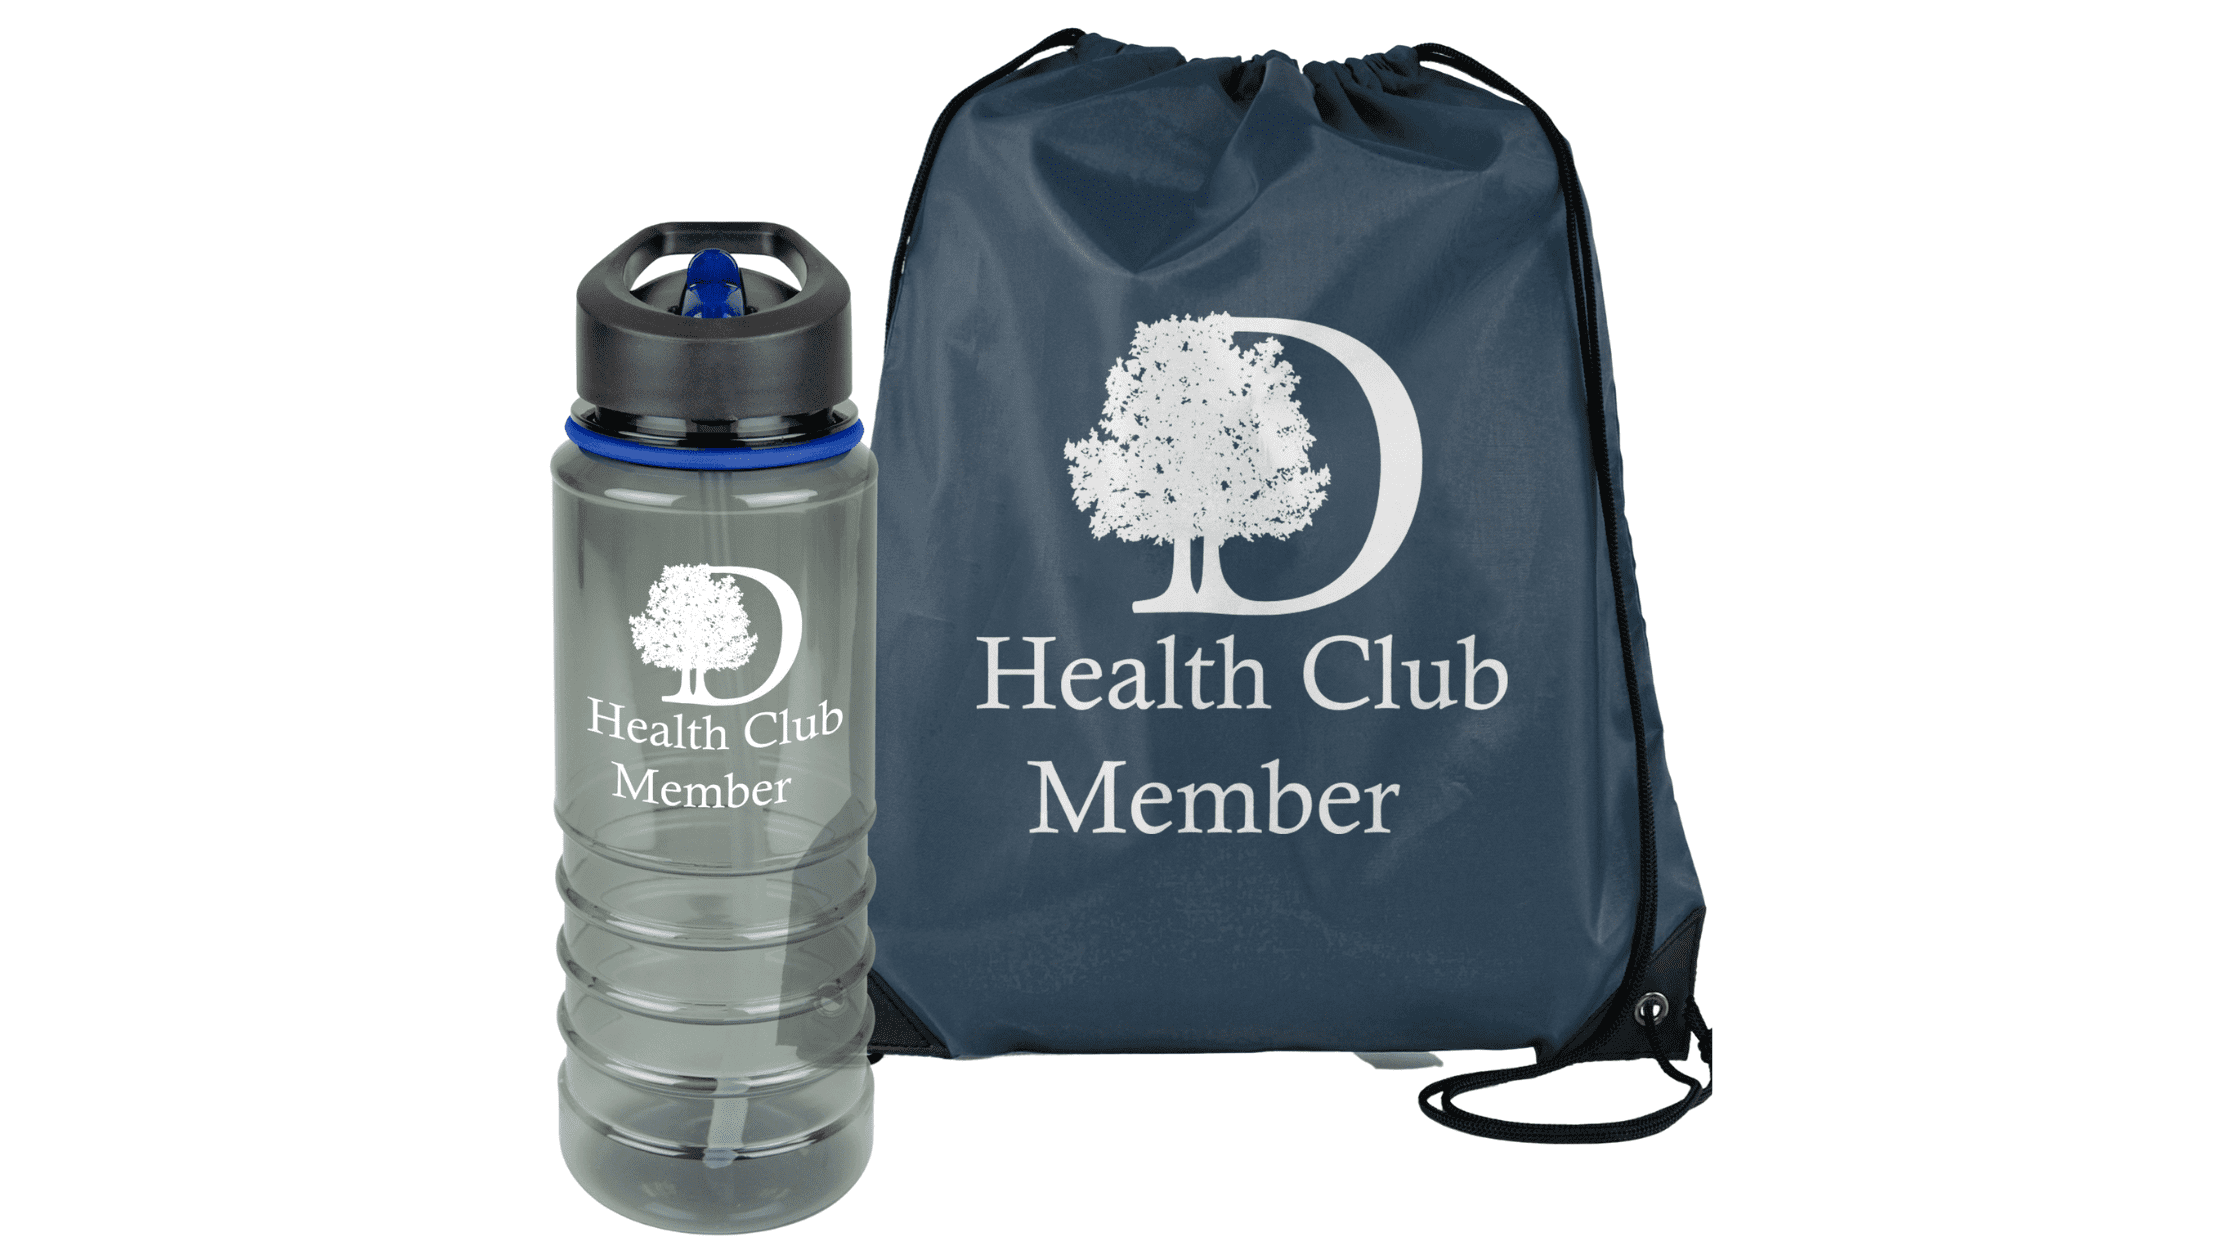 Spa gym bag and bottle